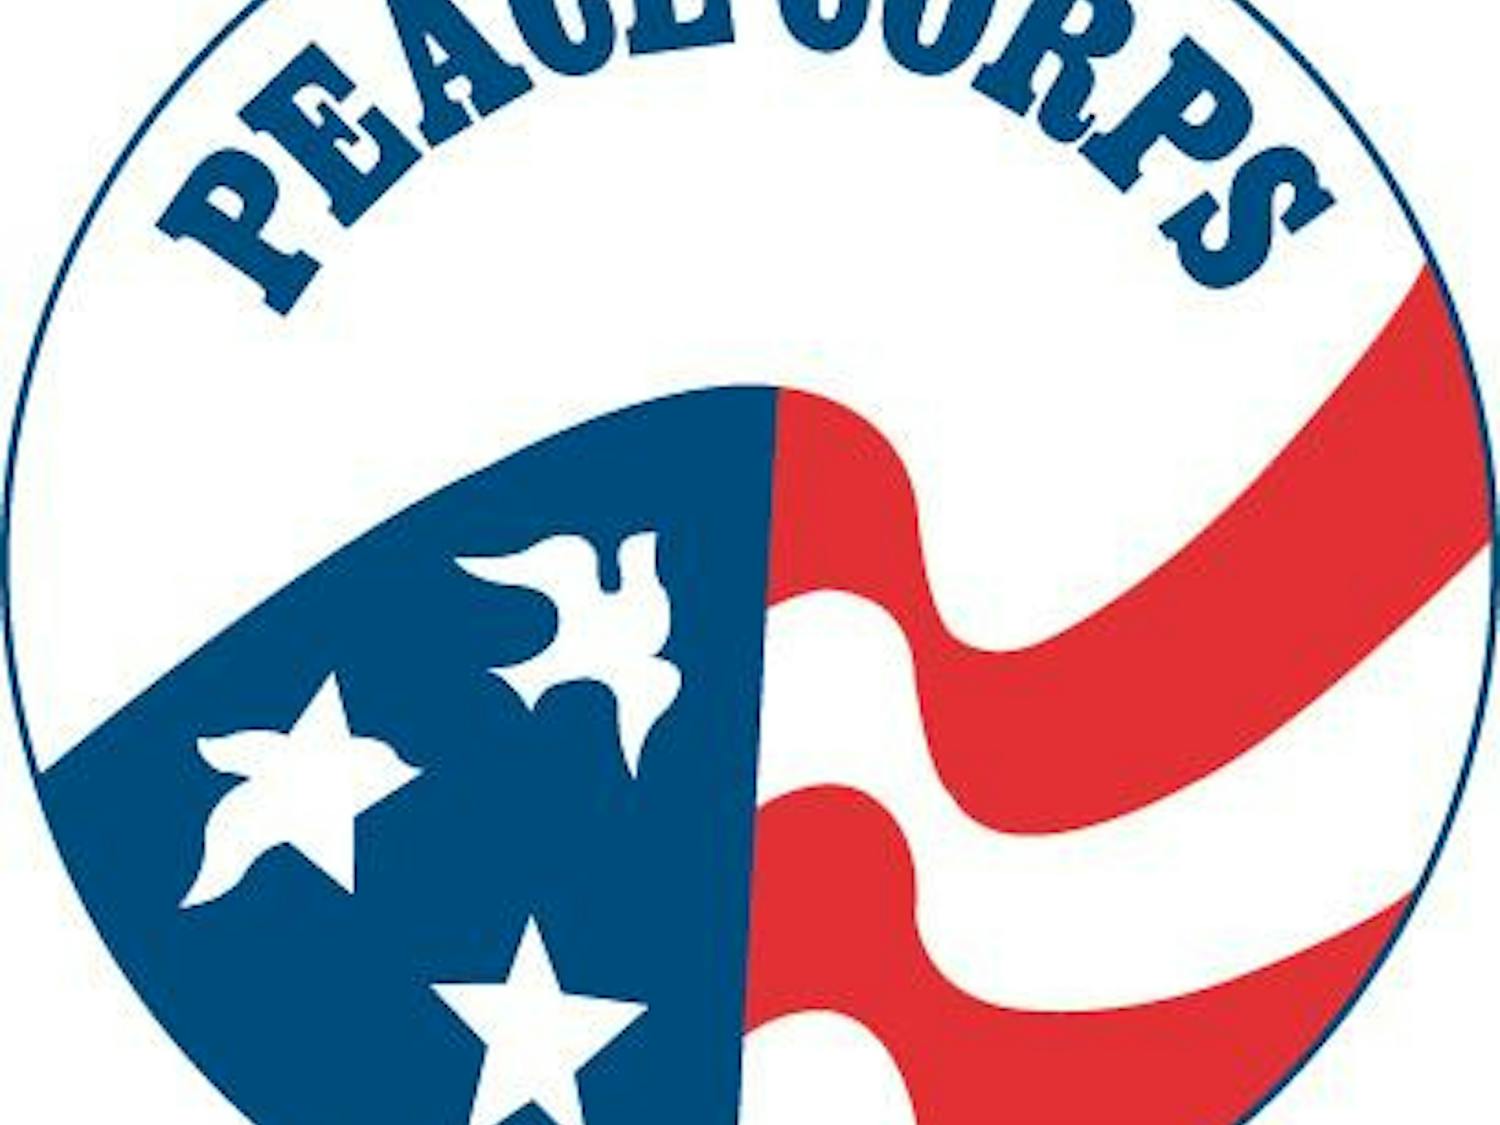 The Peace Corps logo is pictured.